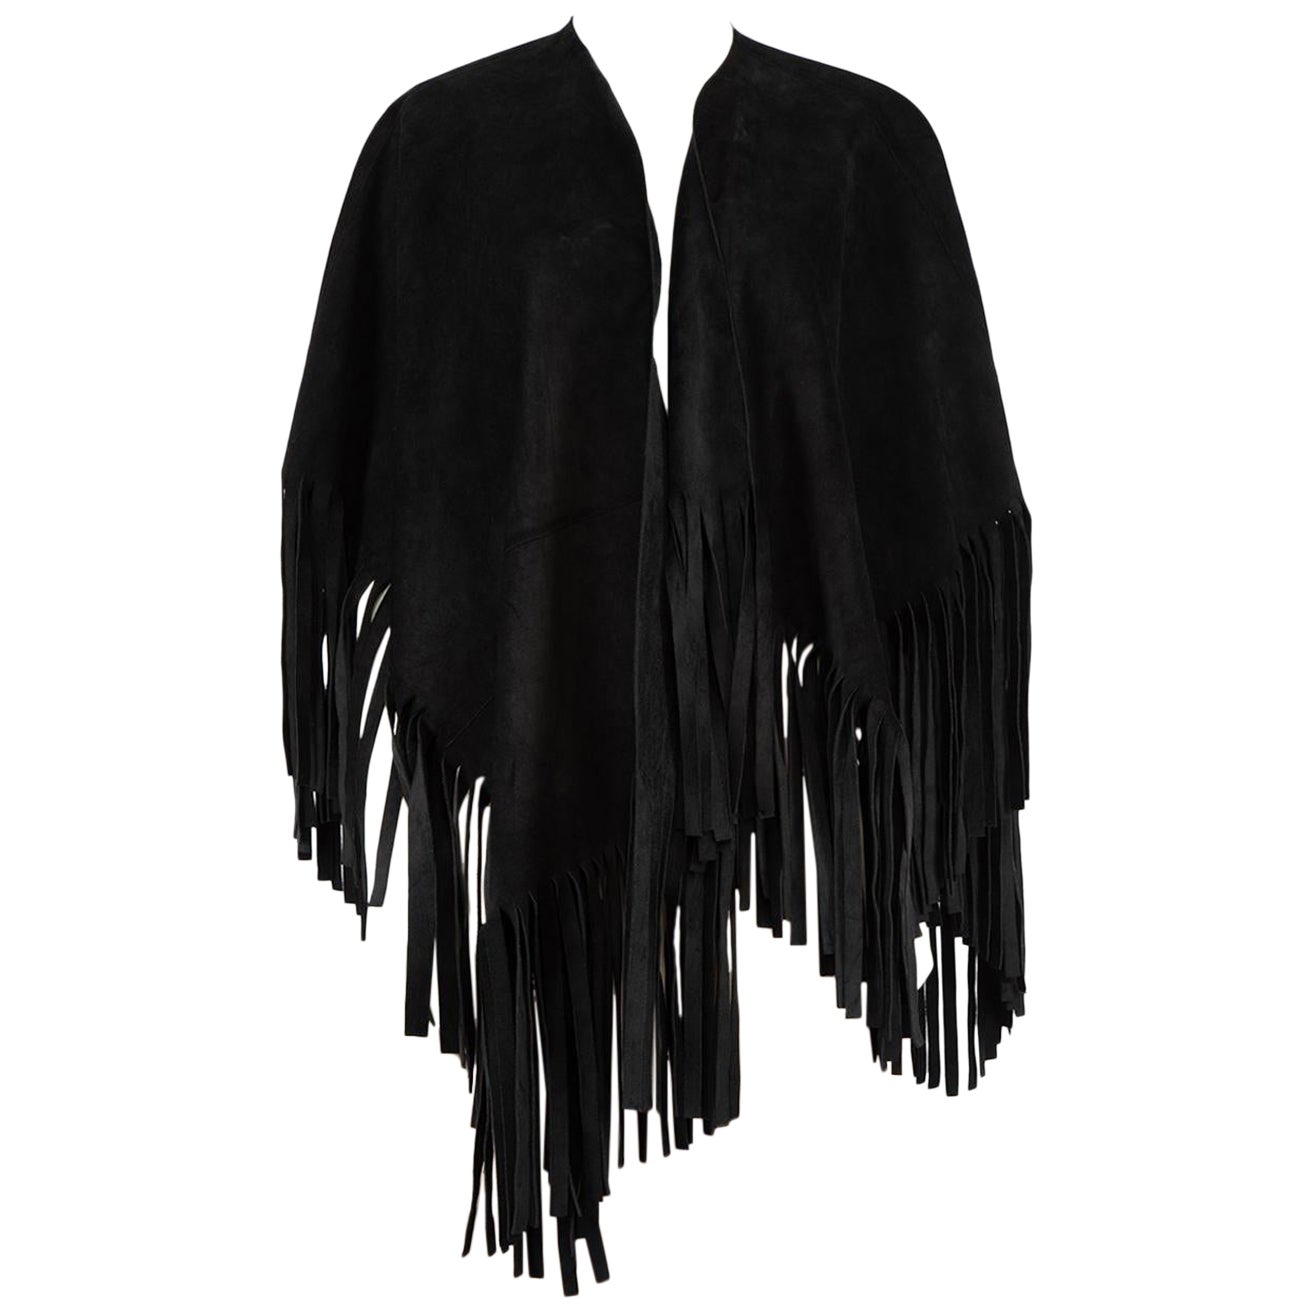 Burberry Burberry Prorsum Black Suede Fringed Poncho Size M For Sale